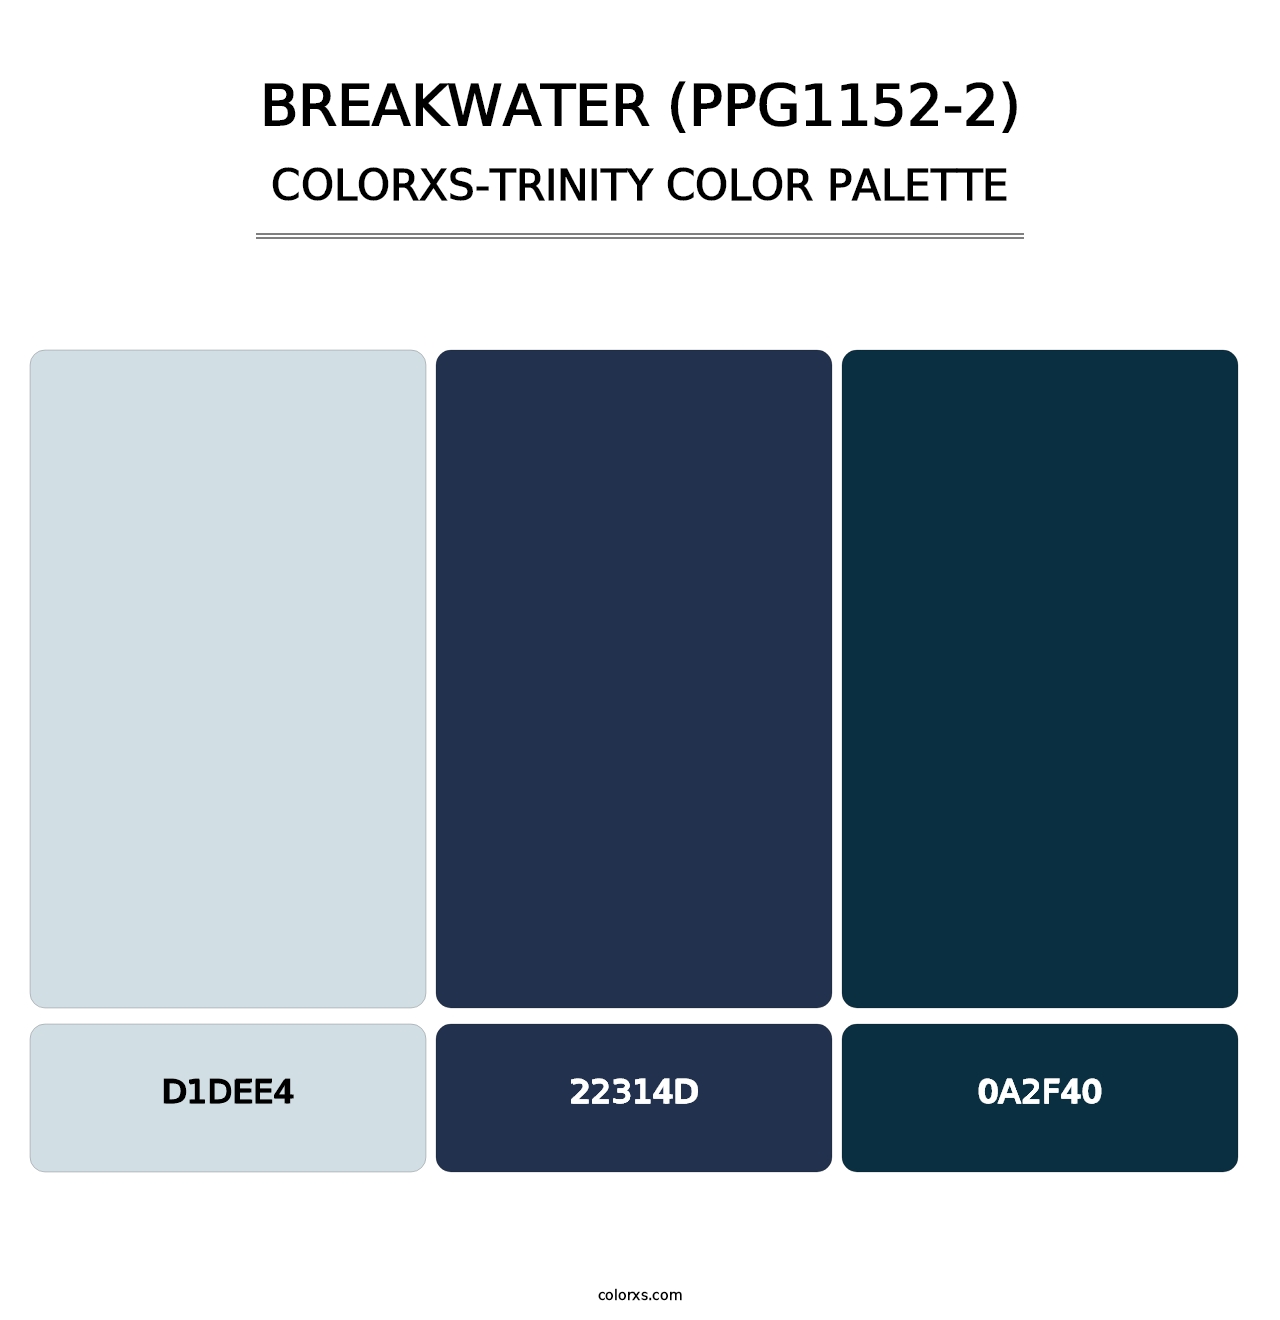 Breakwater (PPG1152-2) - Colorxs Trinity Palette